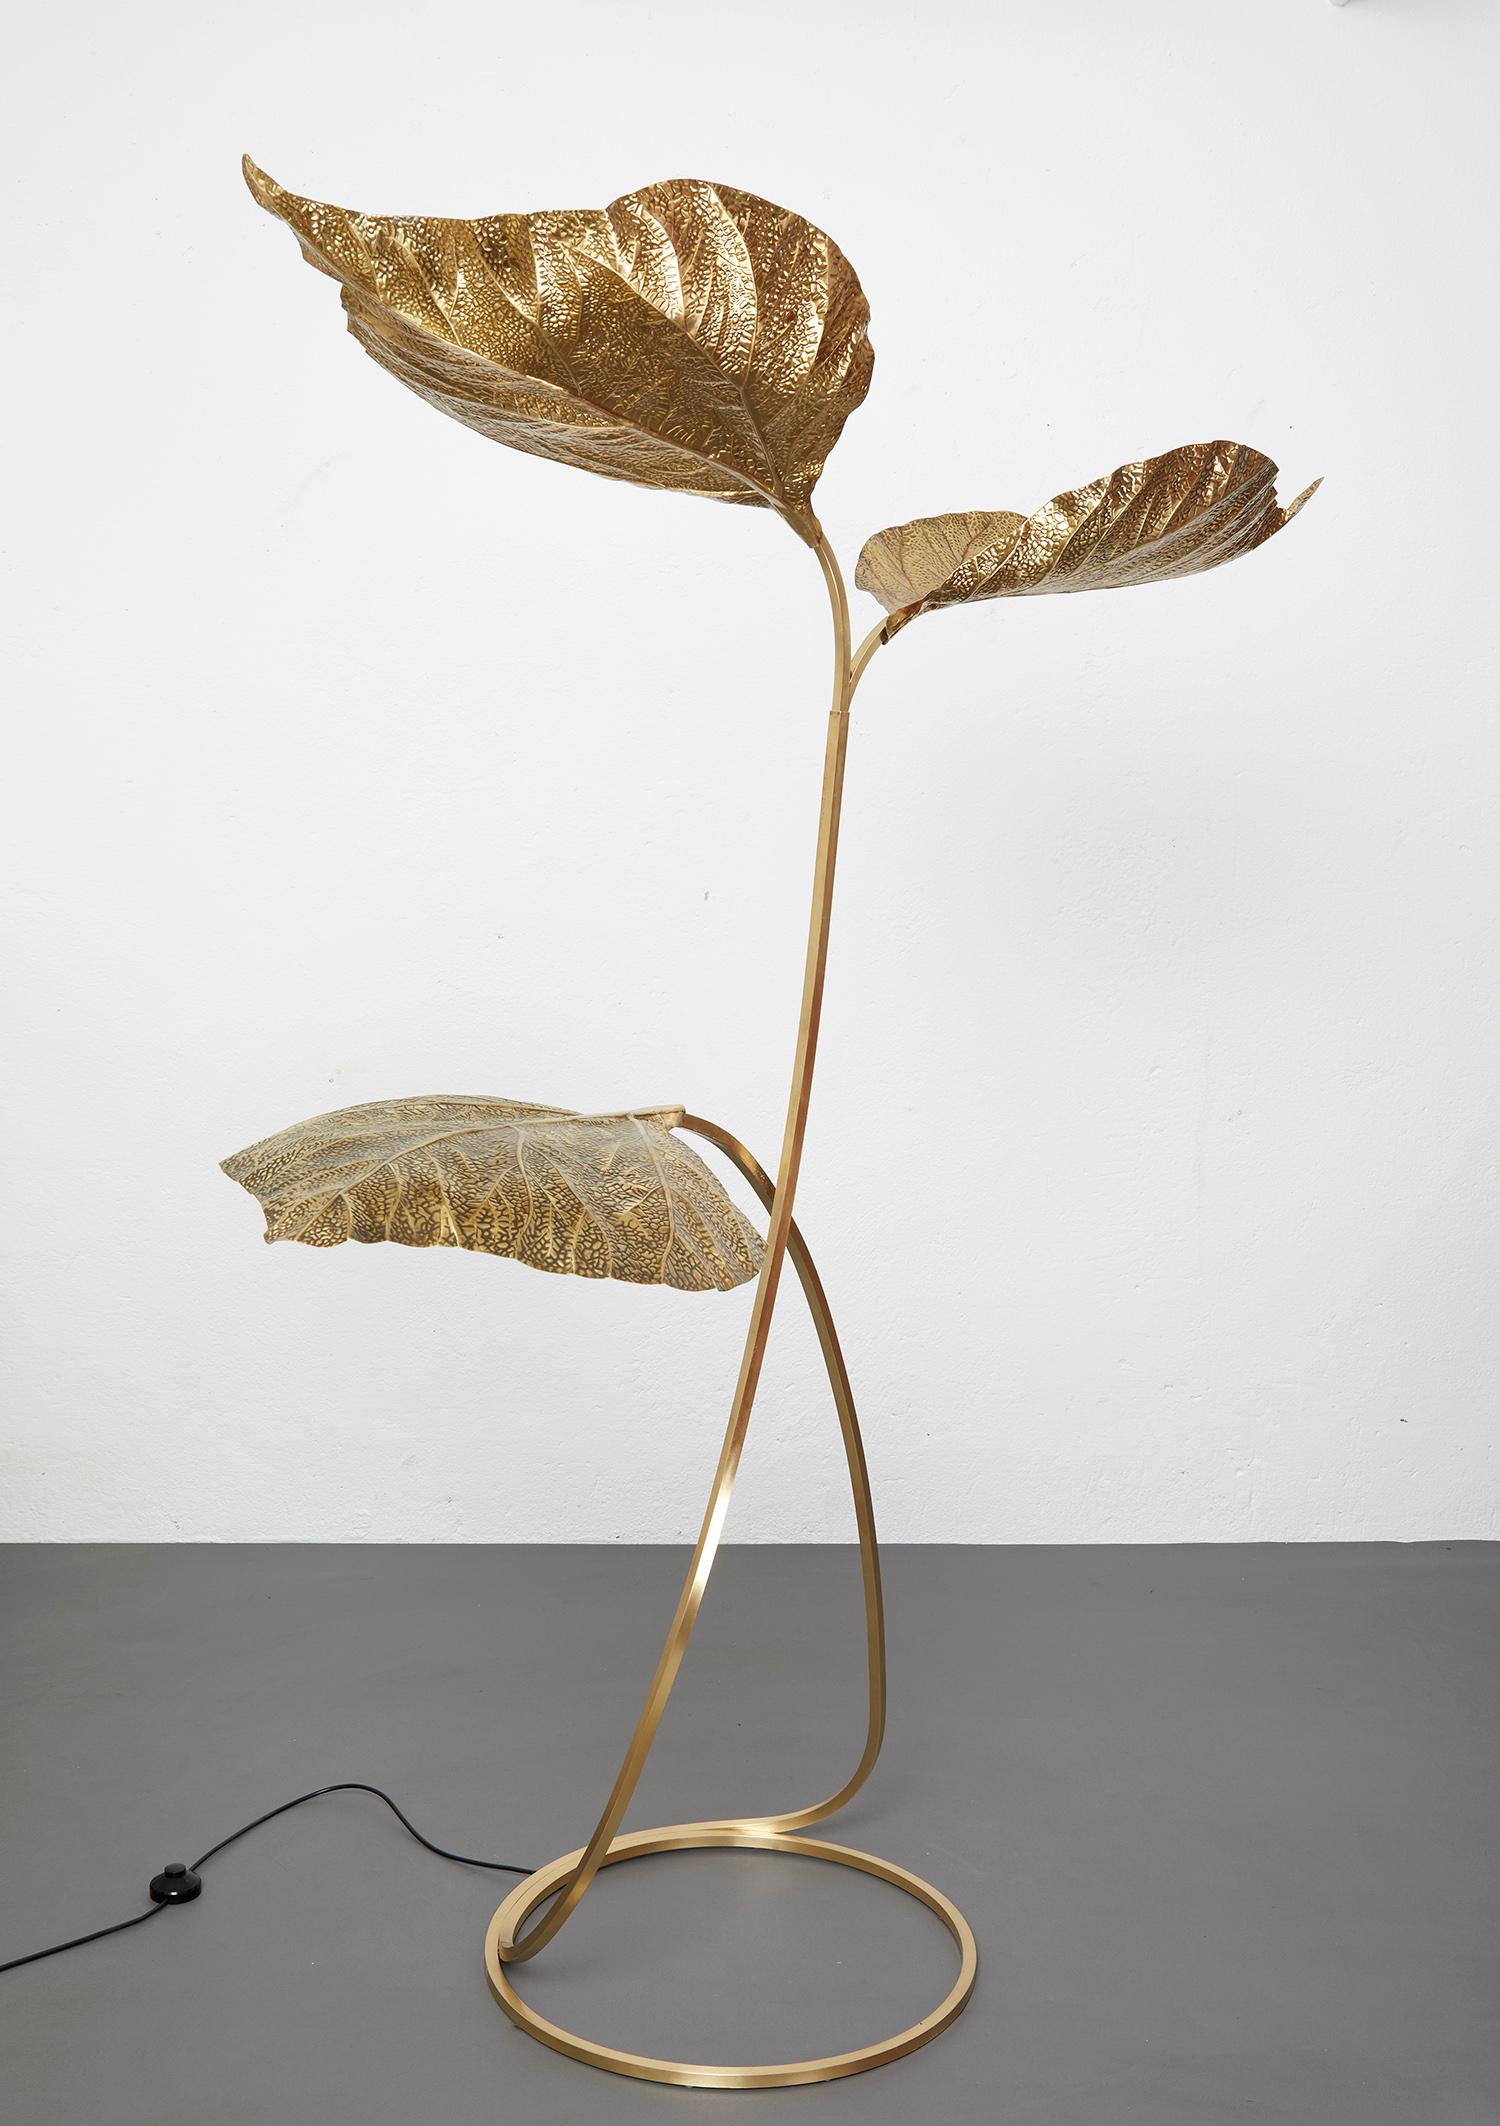 Carlo Giorgi Rabarbaro (rhubarb) brass floor lamp with three leaves for Bottega Gadda, Italy, 1970.

This gorgeous brass floor lamp is often wrongly attributed to Tommaso Barbi but has been actually designed by Italian artist and sculptor Carlo